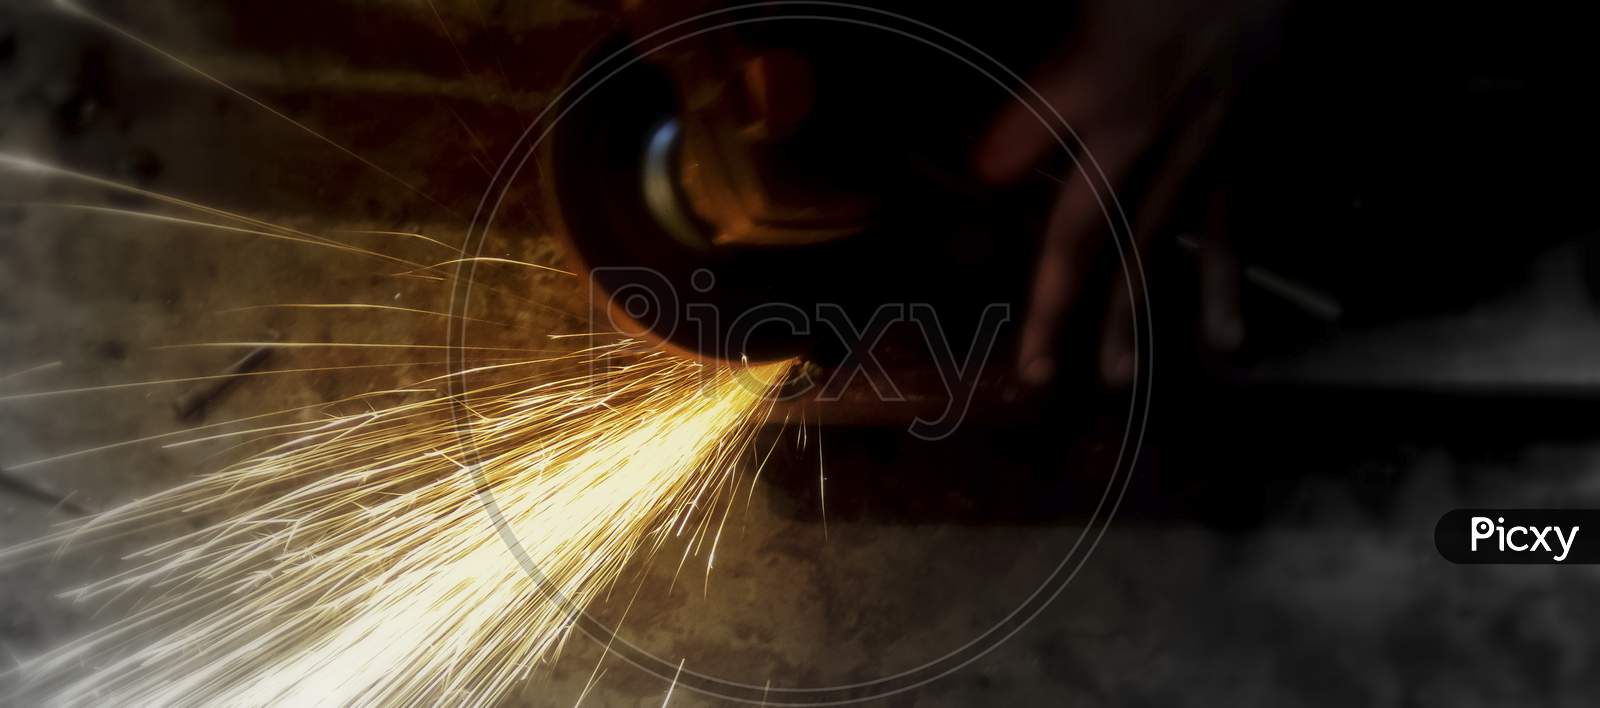 Sparks Flying While Machine Griding And Finishing Metal.Selective Focus.